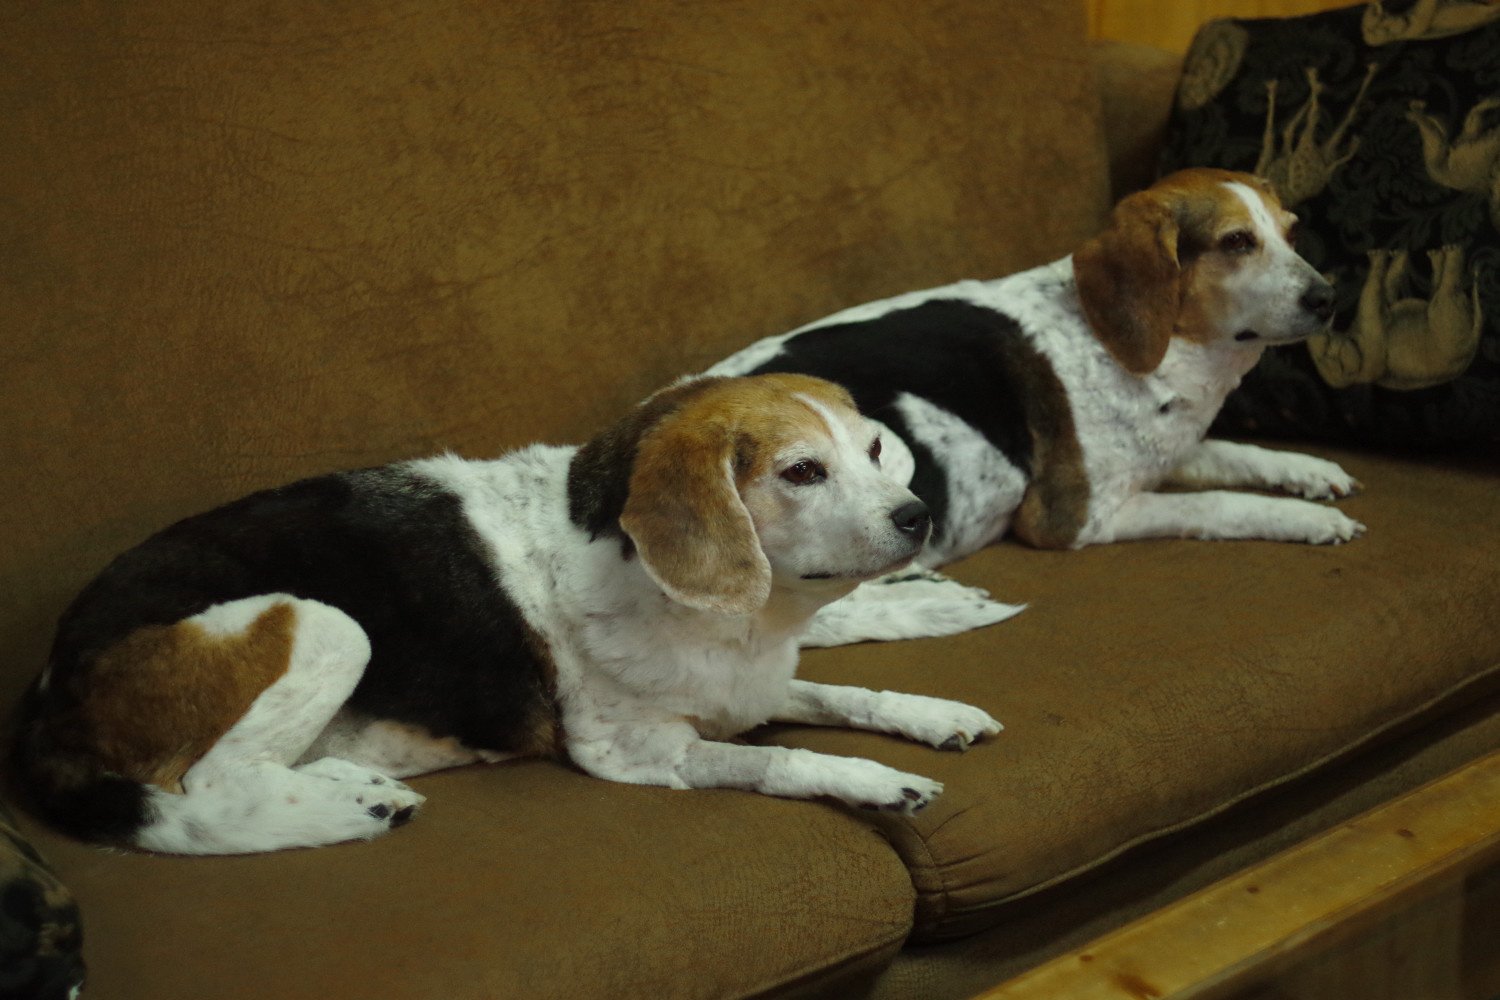 Two beagles done for the same family